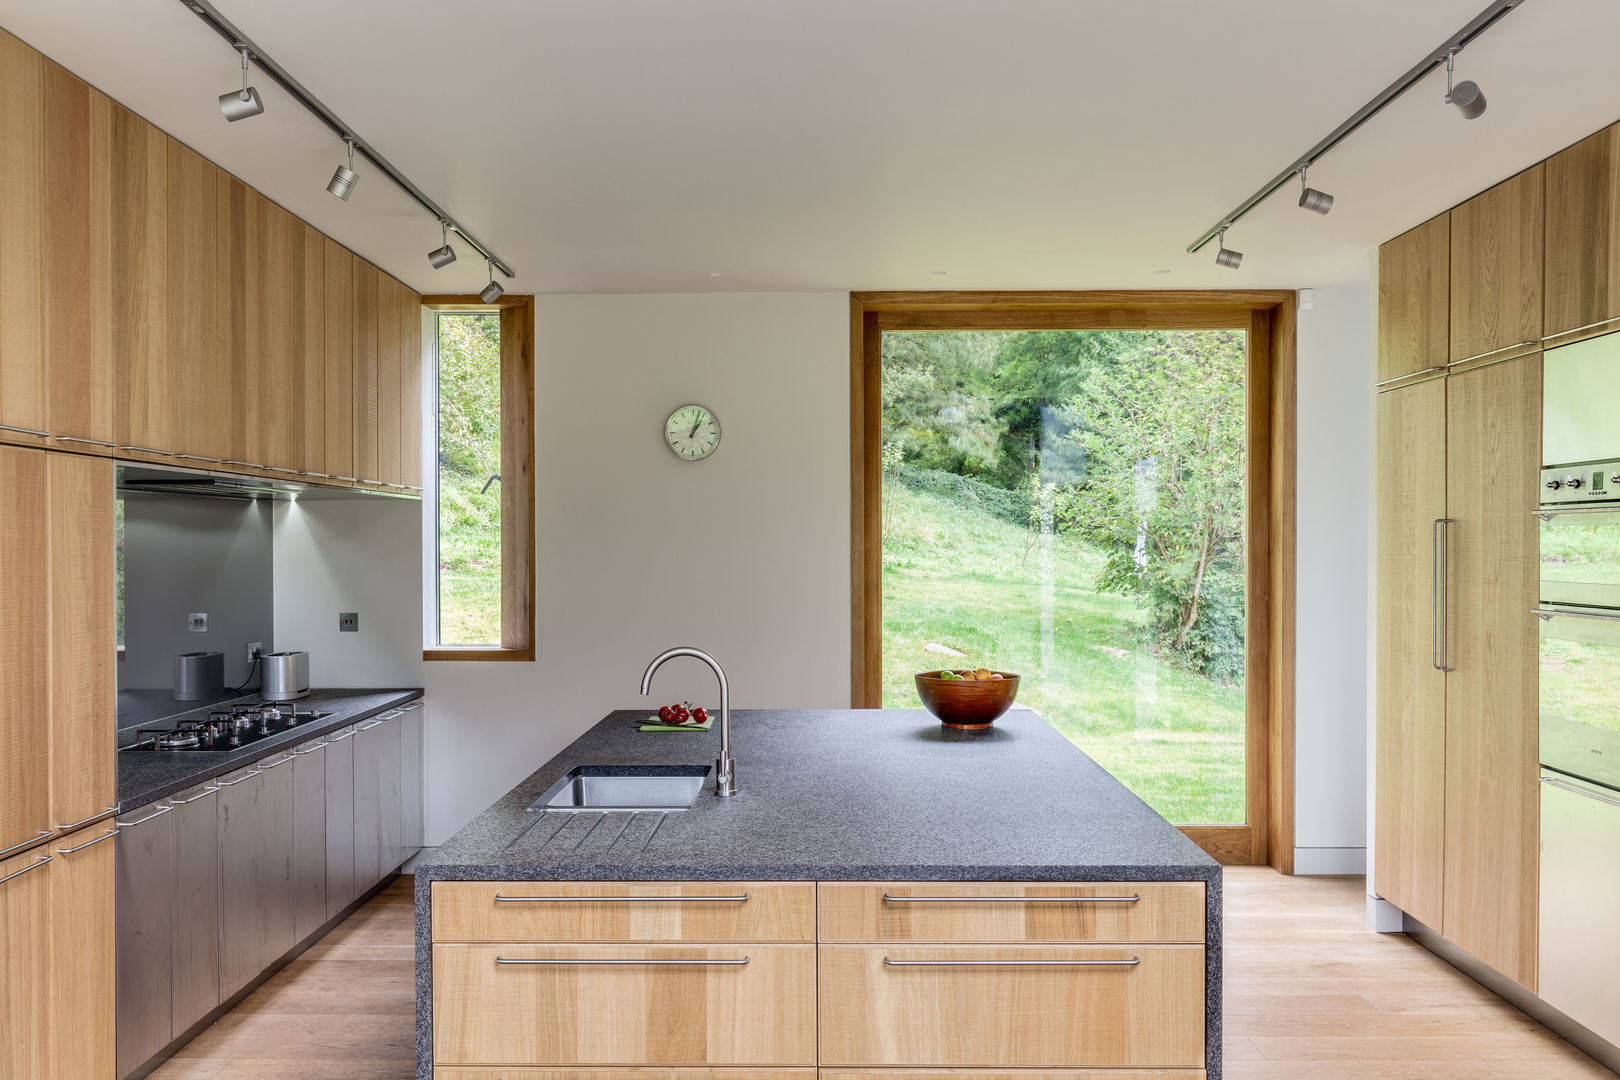 The Nook, Hall + Bednarczyk Architects Hall + Bednarczyk Architects Cocinas modernas